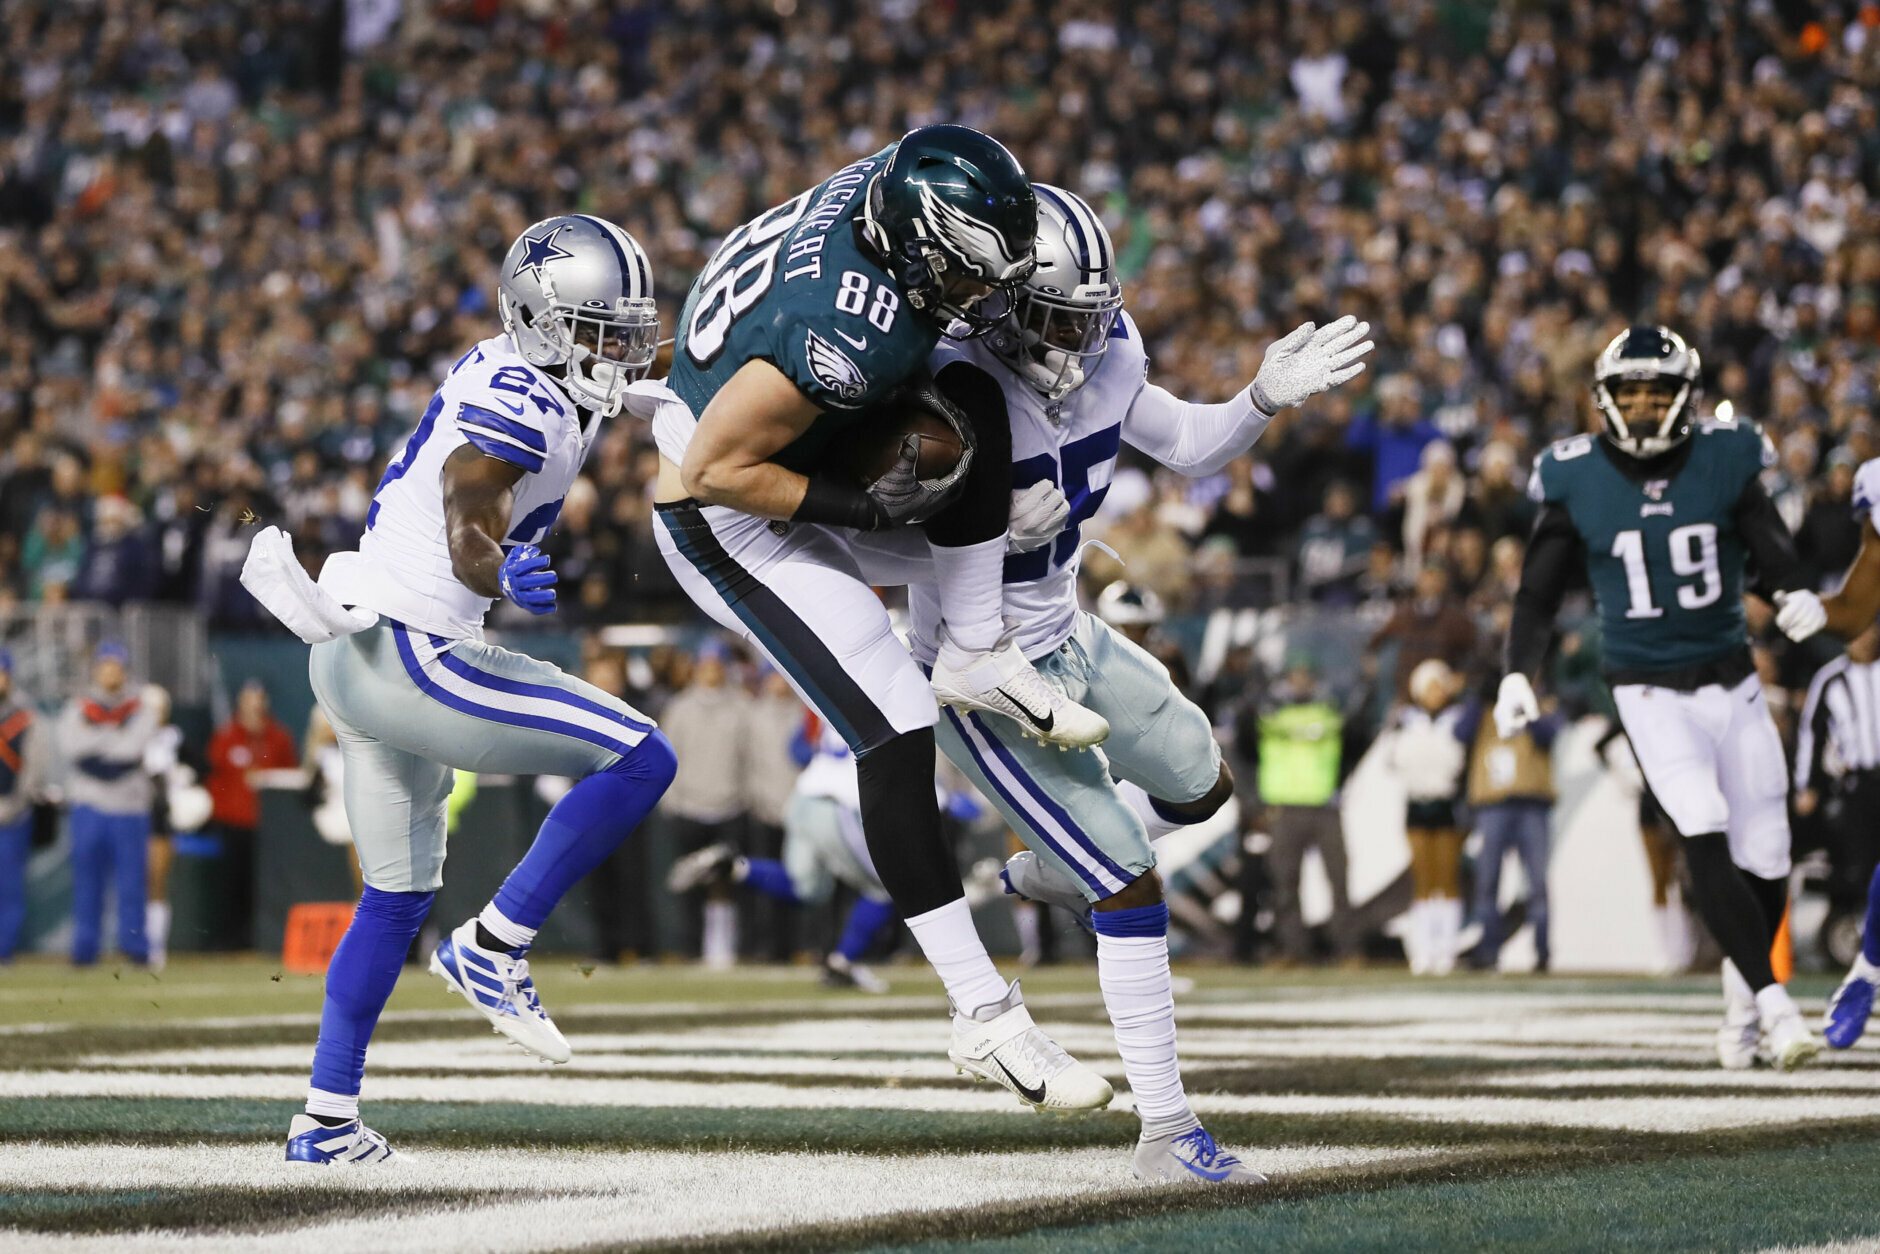 <p><b><i>Cowboys 9</i></b><br />
<b><i>Eagles 17</i></b></p>
<p>Dallas&#8217; <a href="https://twitter.com/ESPNStatsInfo/status/1208921648889520128?s=20" target="_blank" rel="noopener" data-saferedirecturl="https://www.google.com/url?q=https://twitter.com/ESPNStatsInfo/status/1208921648889520128?s%3D20&amp;source=gmail&amp;ust=1577160325113000&amp;usg=AFQjCNGsvSm2wTTv3yoLYstK-BKOikwNHg">consistent failure in one-score games</a> is exactly why Jason Garrett is basically done in Big D, and why Philly is about to steal the NFC East. Don&#8217;t be surprised if the woebegone Redskins deliver the deathblow to the Cowboys — especially if, you know, <a href="https://twitter.com/fishsports/status/1208933630422274050?s=20" target="_blank" rel="noopener" data-saferedirecturl="https://www.google.com/url?q=https://twitter.com/fishsports/status/1208933630422274050?s%3D20&amp;source=gmail&amp;ust=1577160325113000&amp;usg=AFQjCNG1LSj8y3u8643fUveS3_7Cog9RpA">they can&#8217;t get back home for the game</a> — and the Eagles come up short against the Giants but win the division by default.</p>
